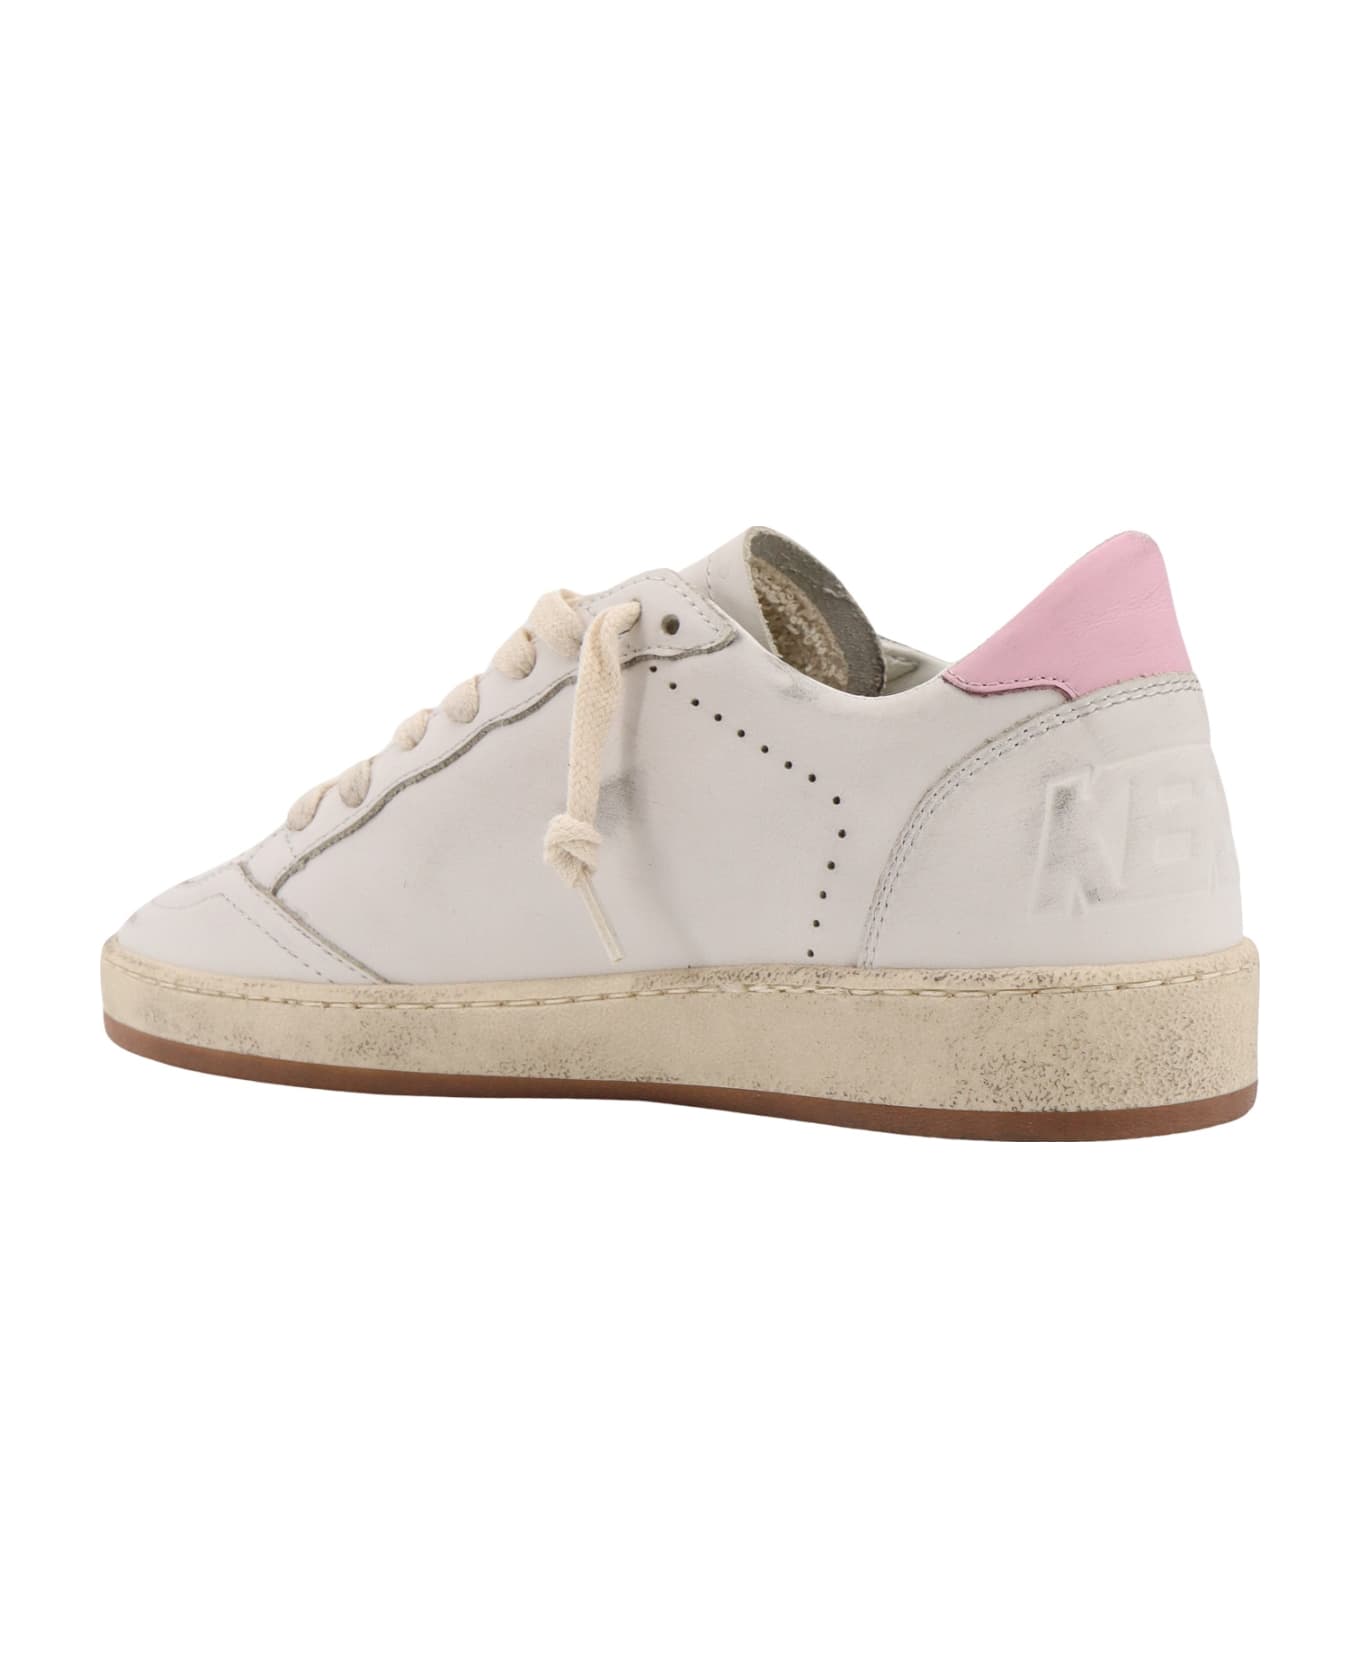 Golden Goose Ball-star Sneakers - White/platinum/orchid pink